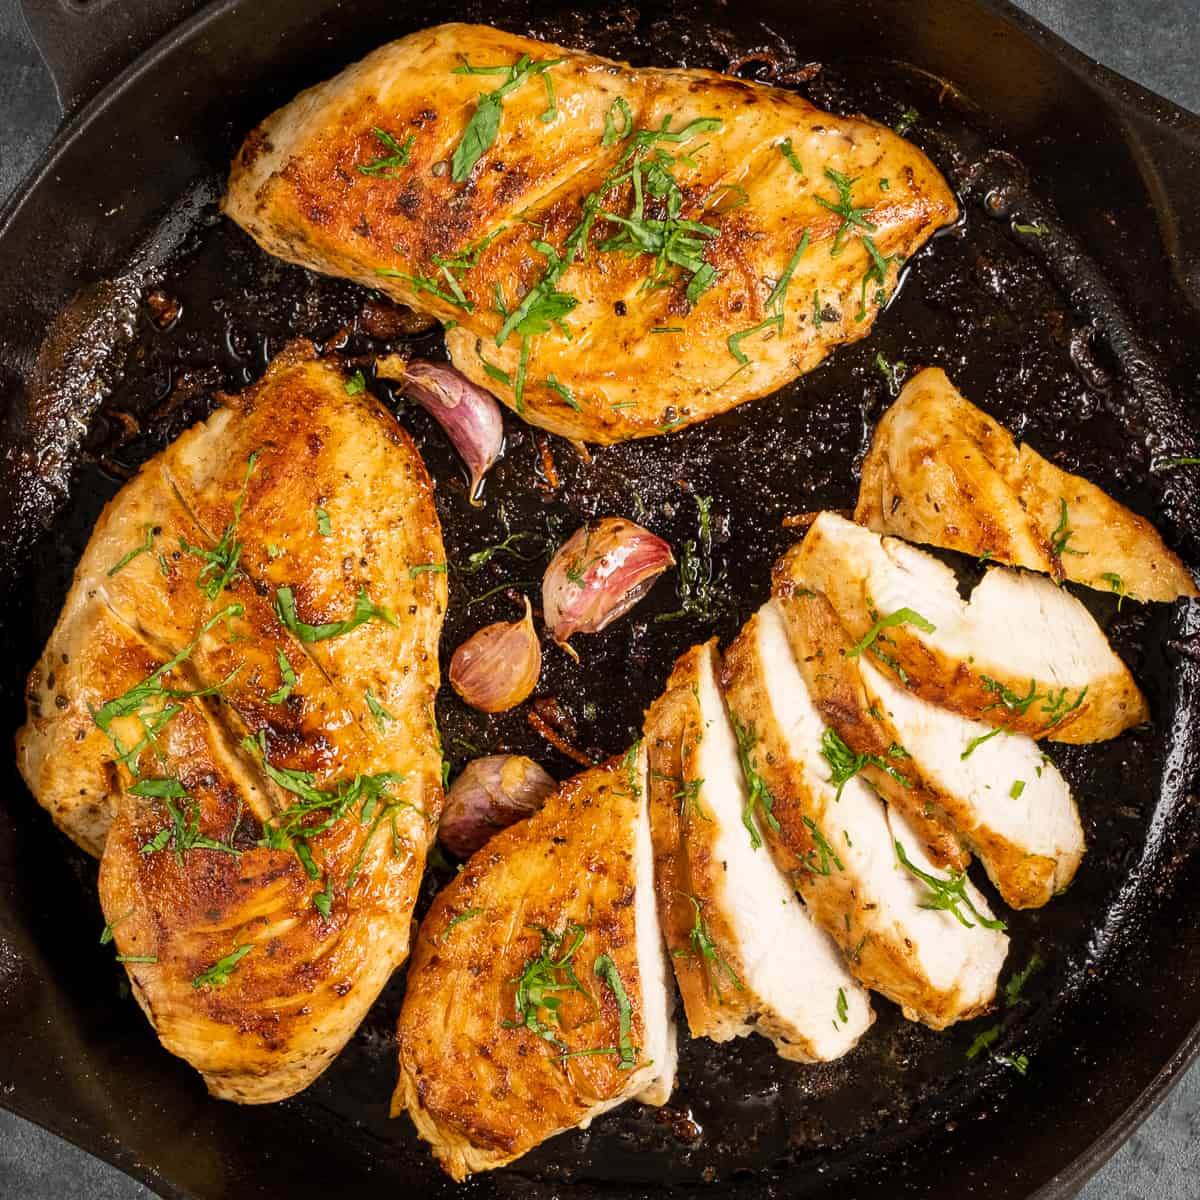 The Best Way to Grill a Chicken? On a Cast-Iron Skillet